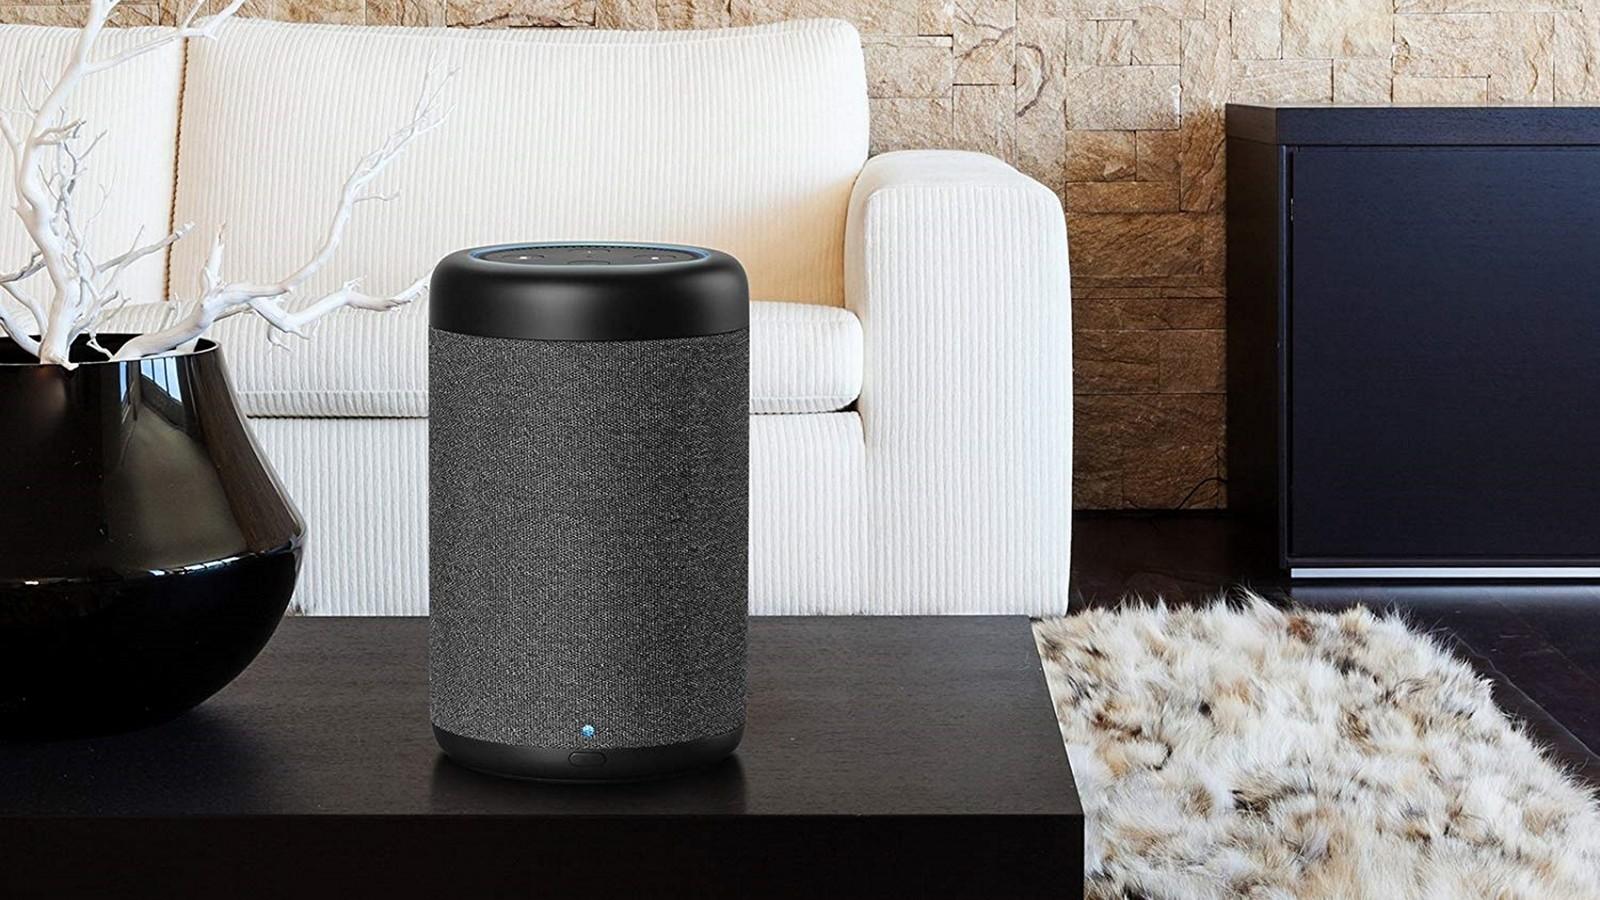 Best Speaker to Use with Your Amazon Echo Dot in 2019